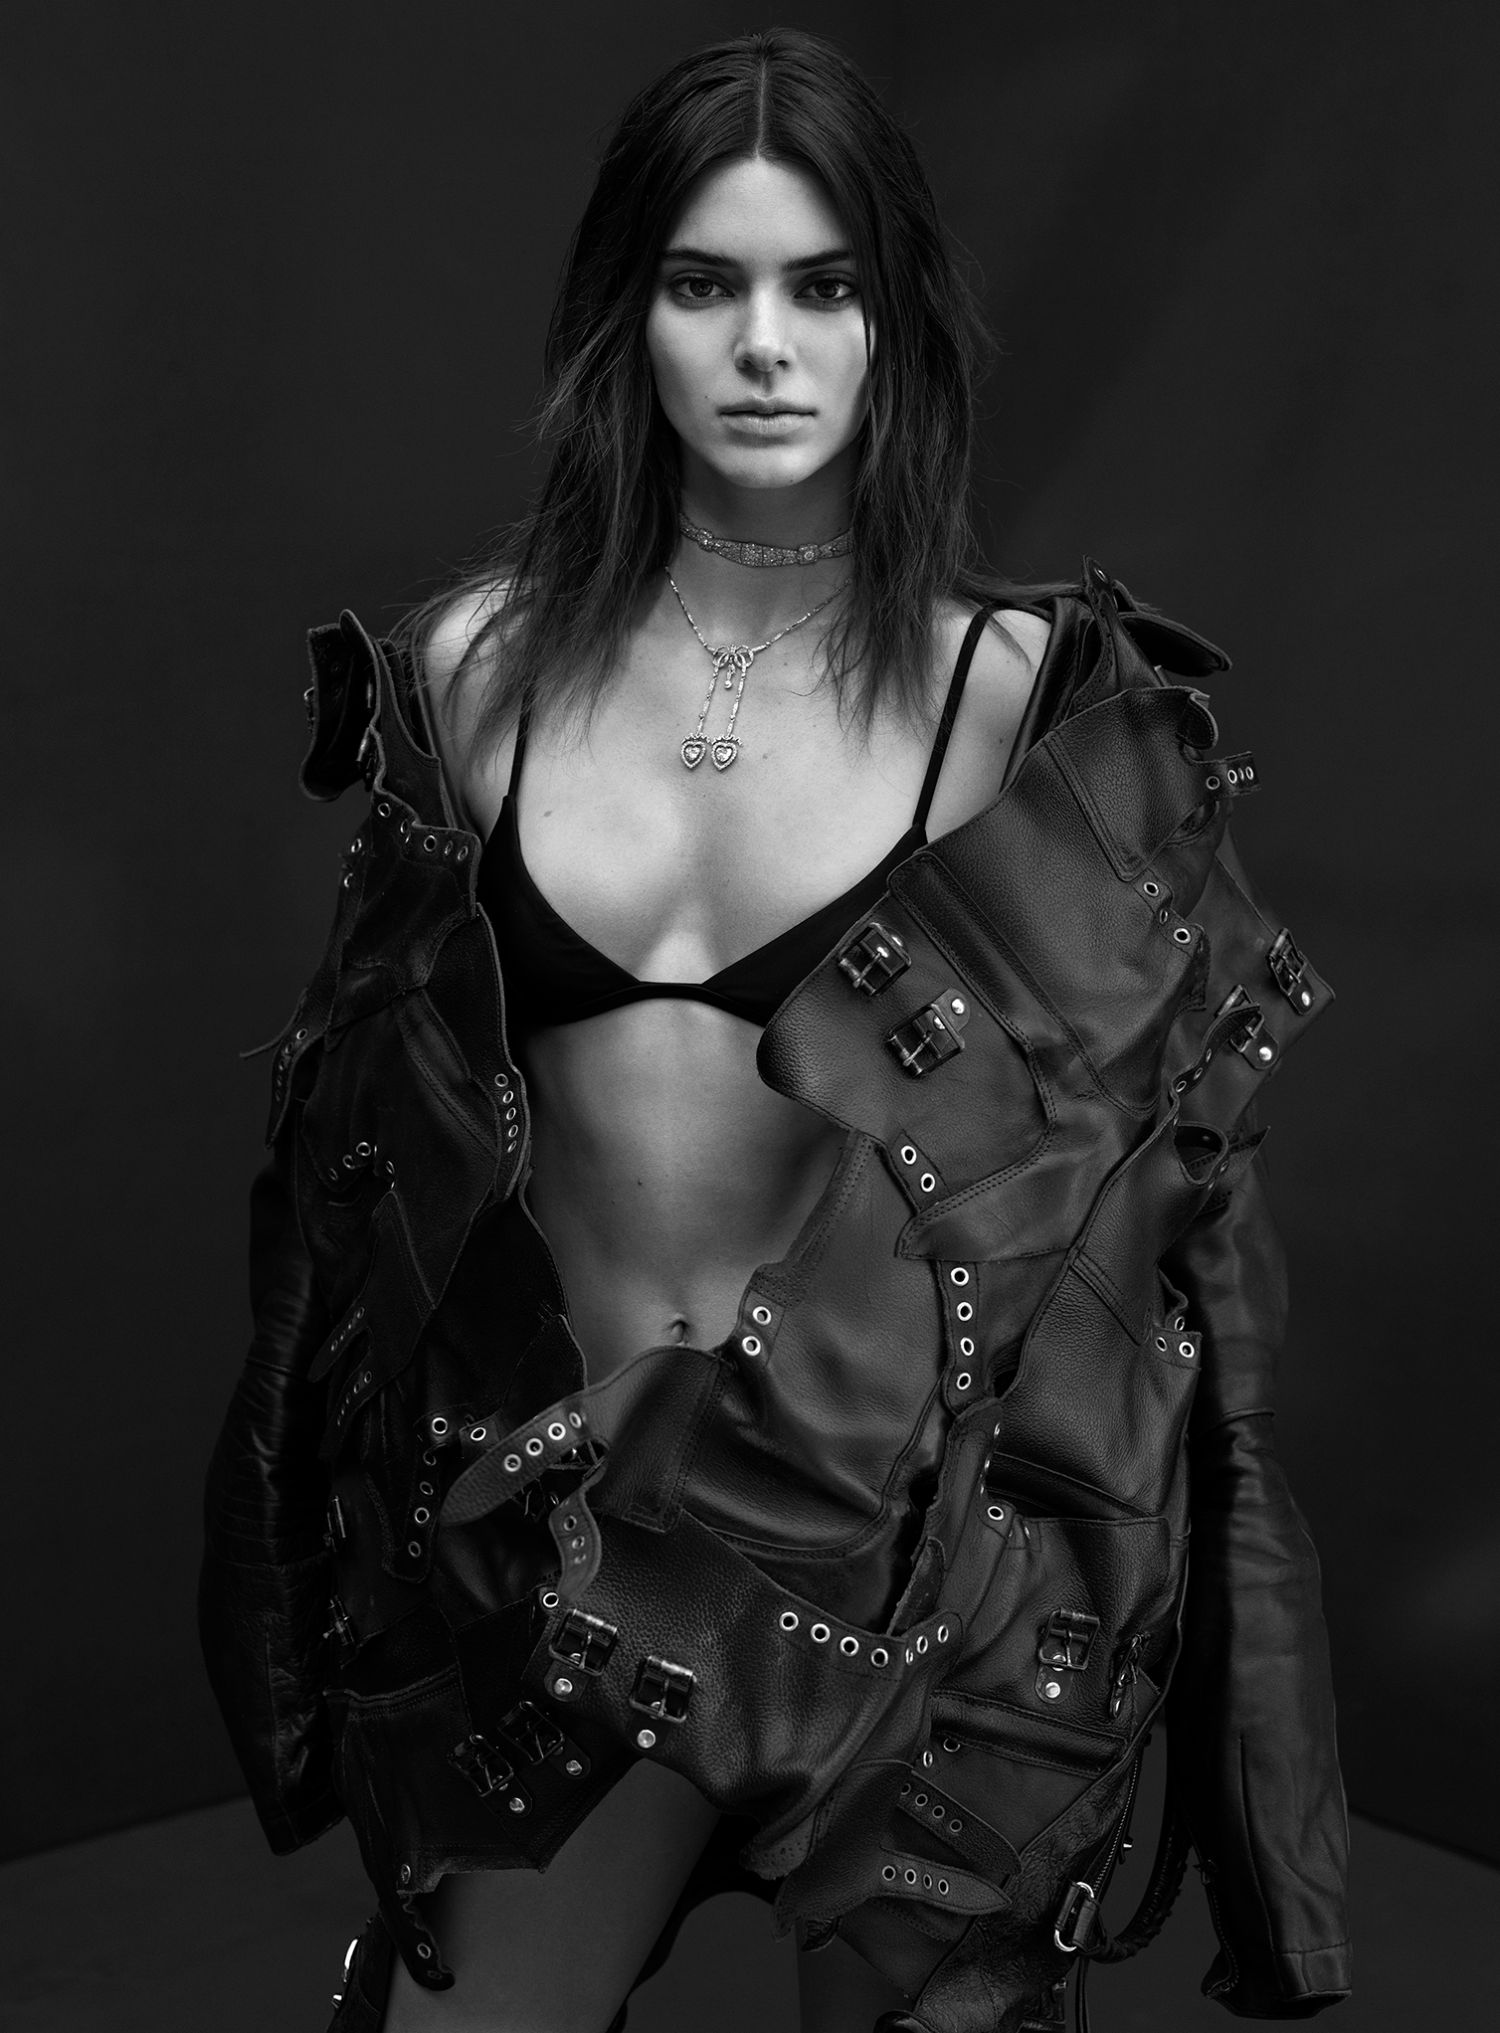 Supernova Summer: Kendall Jenner by Mario Sorrenti for V Magazine Summer 2021. Clothing & Jewelry: Matteau Black Petite Triangle recycled bikini top / Matteau Black The Classic bikini briefs; Jacket by Balenciaga; Boots by Givenchy; Necklace by Cartier